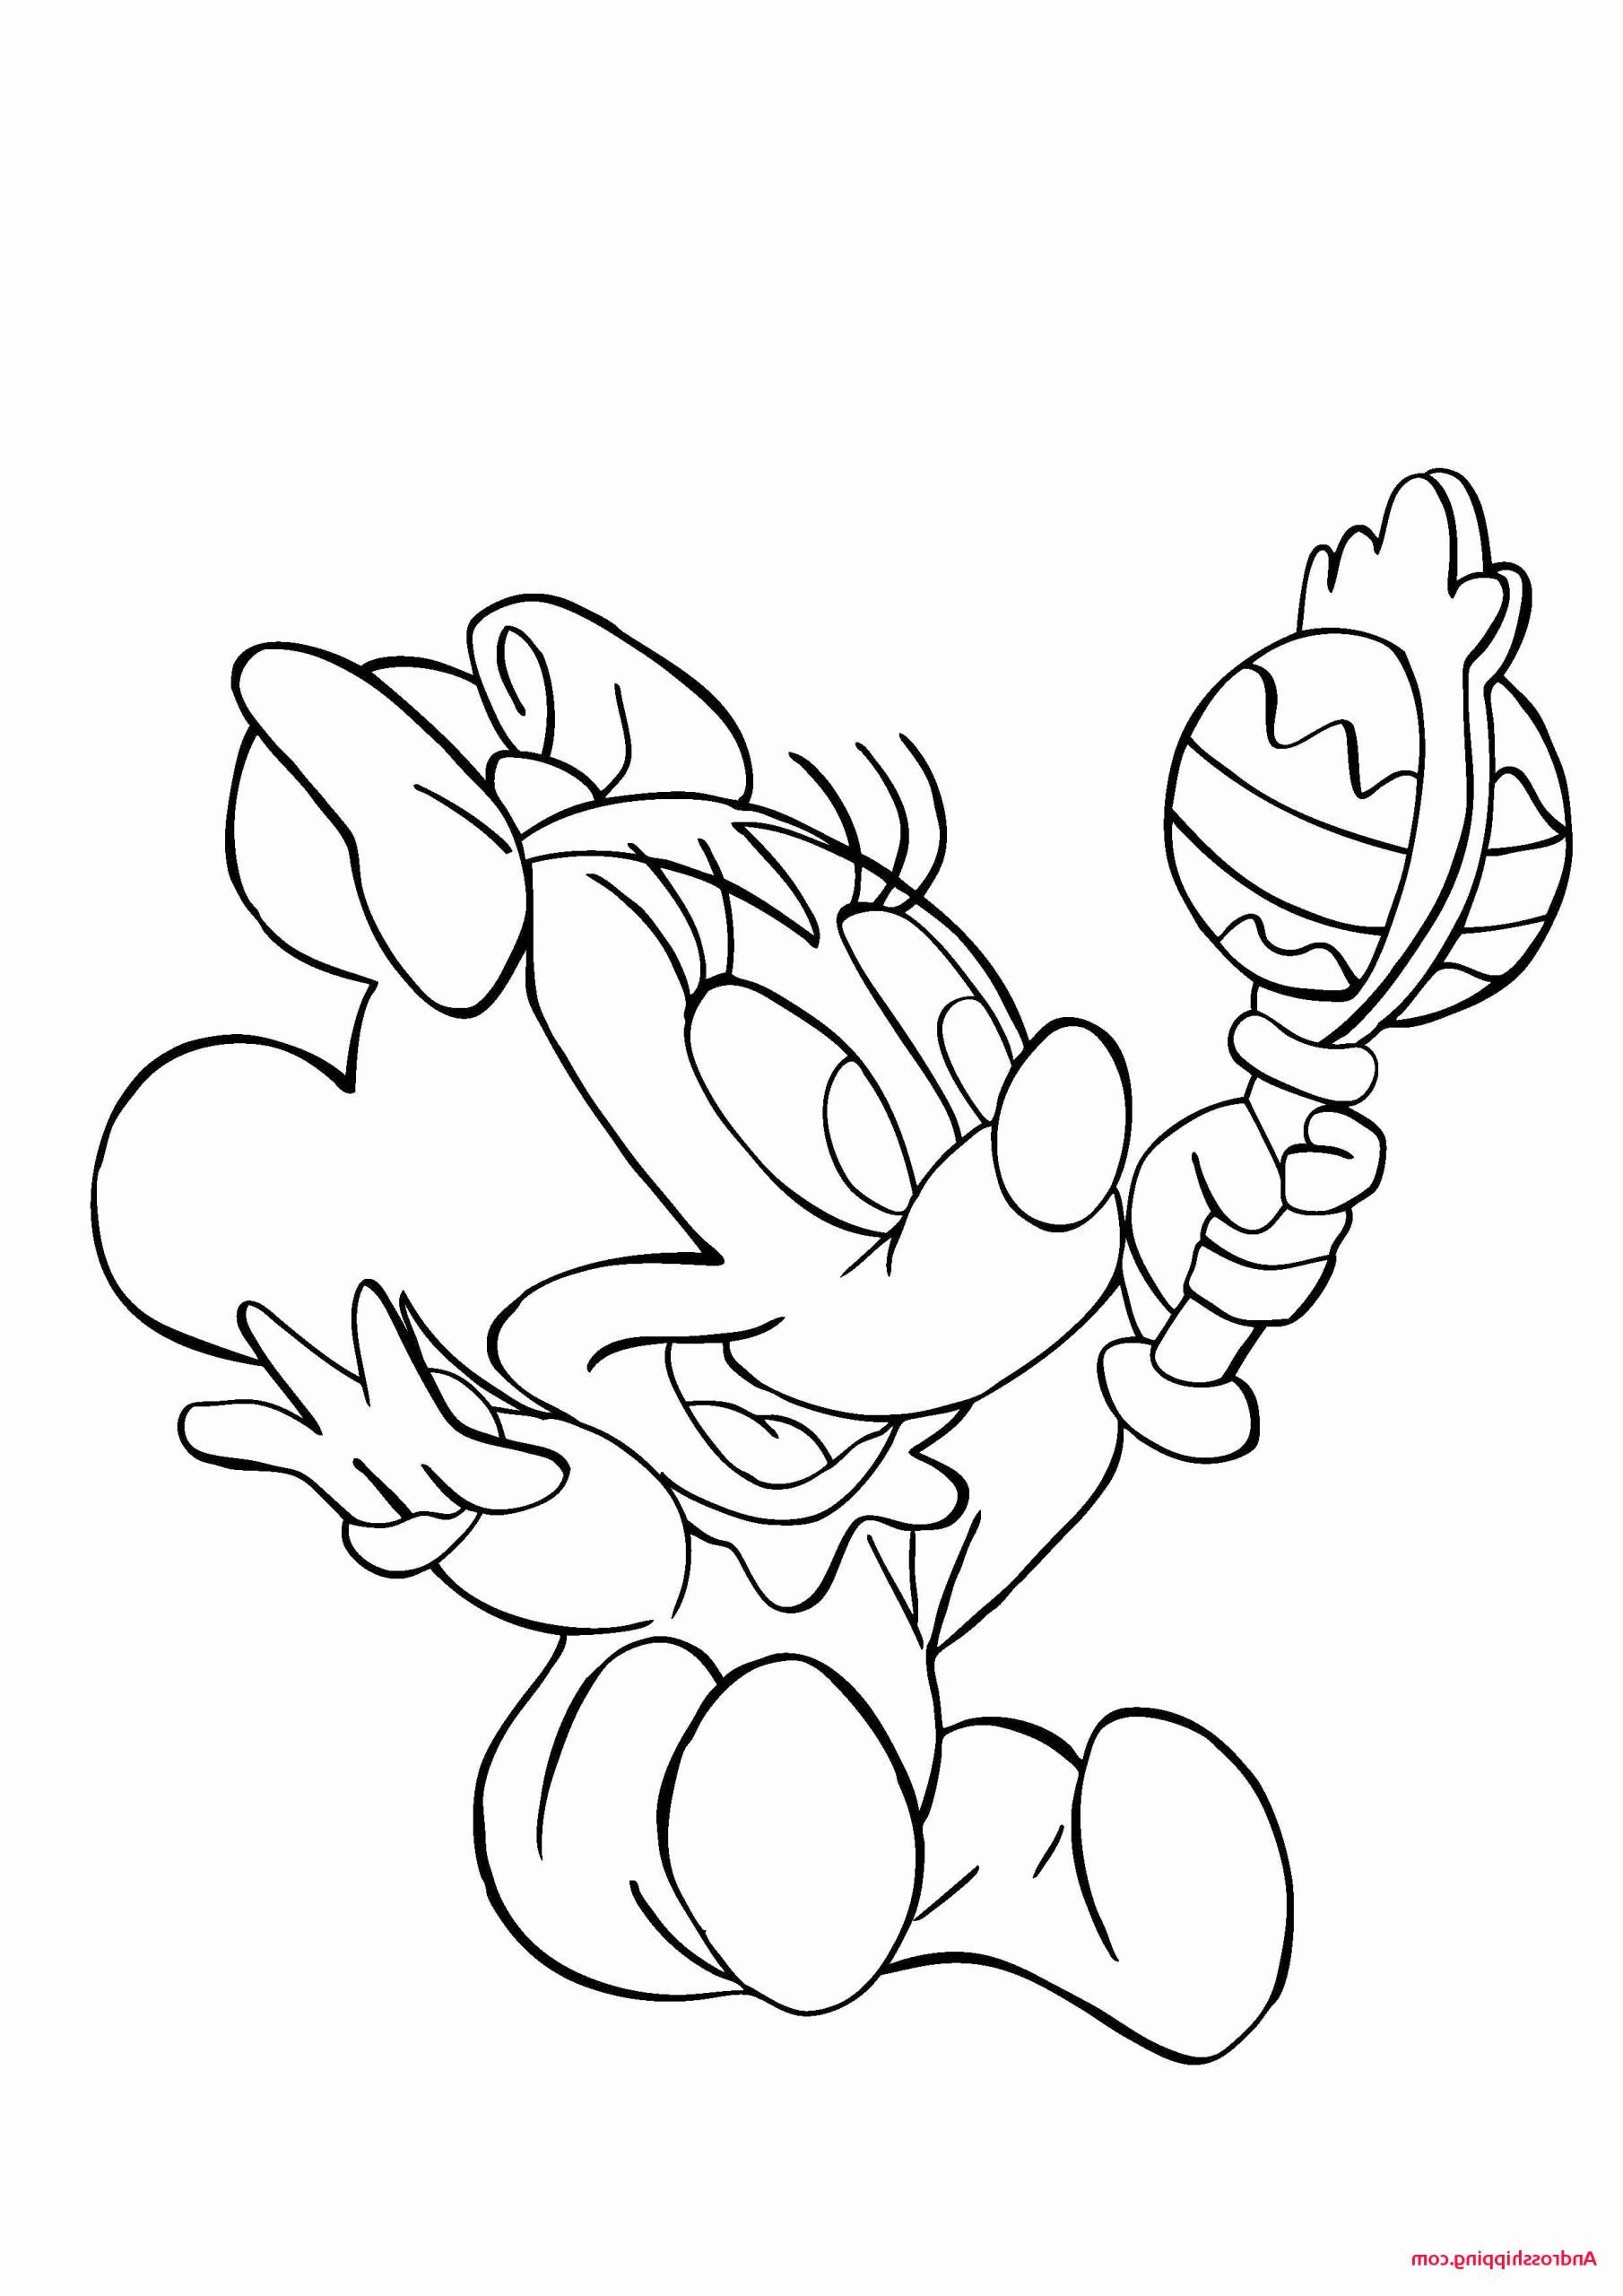 Mickey Mouse Valentine Coloring Pages Lovely 21 Cool Gallery Mice Coloring  Pag… | Mickey mouse coloring pages, Minnie mouse coloring pages, Valentine coloring  pages